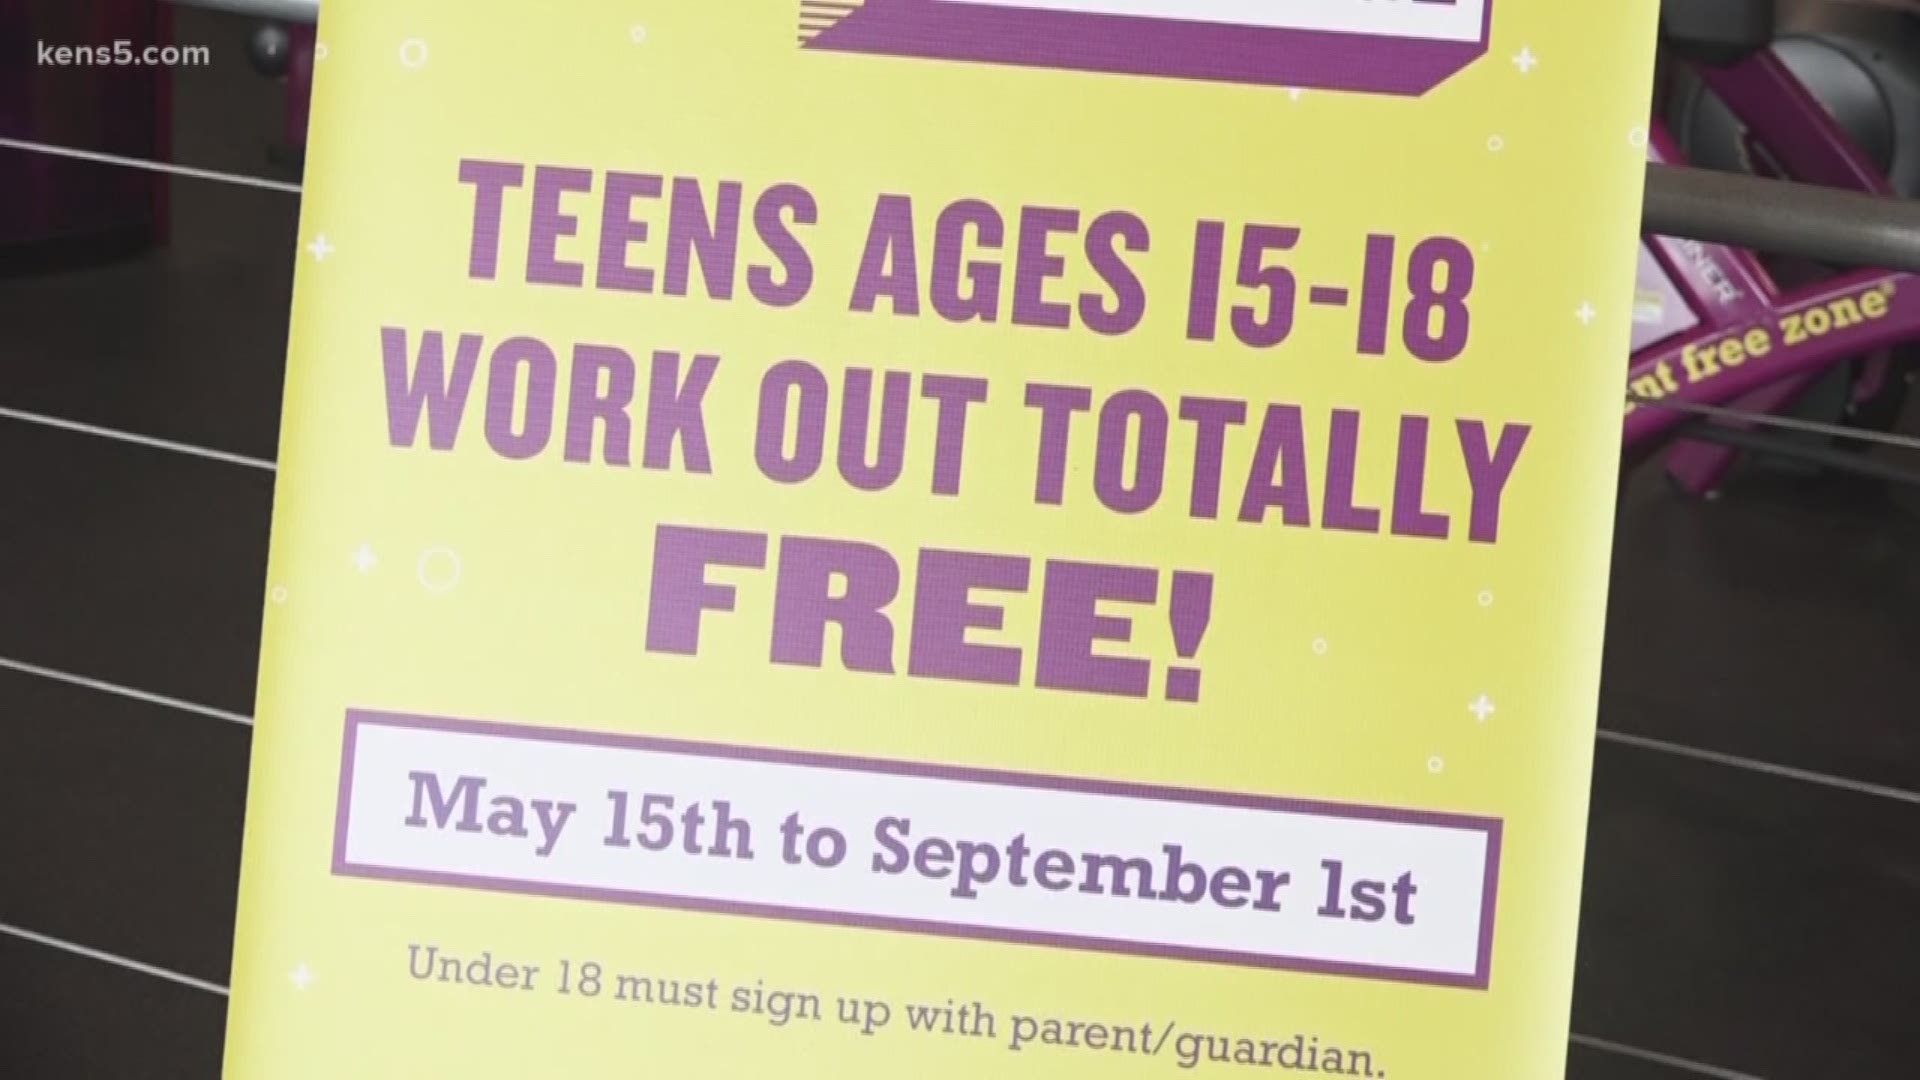 Childhood obesity in San Antonio is skyrocketing. Now Planet Fitness and the Boys and Girls Clubs of America are teaming up in a unique way to fight the problem.